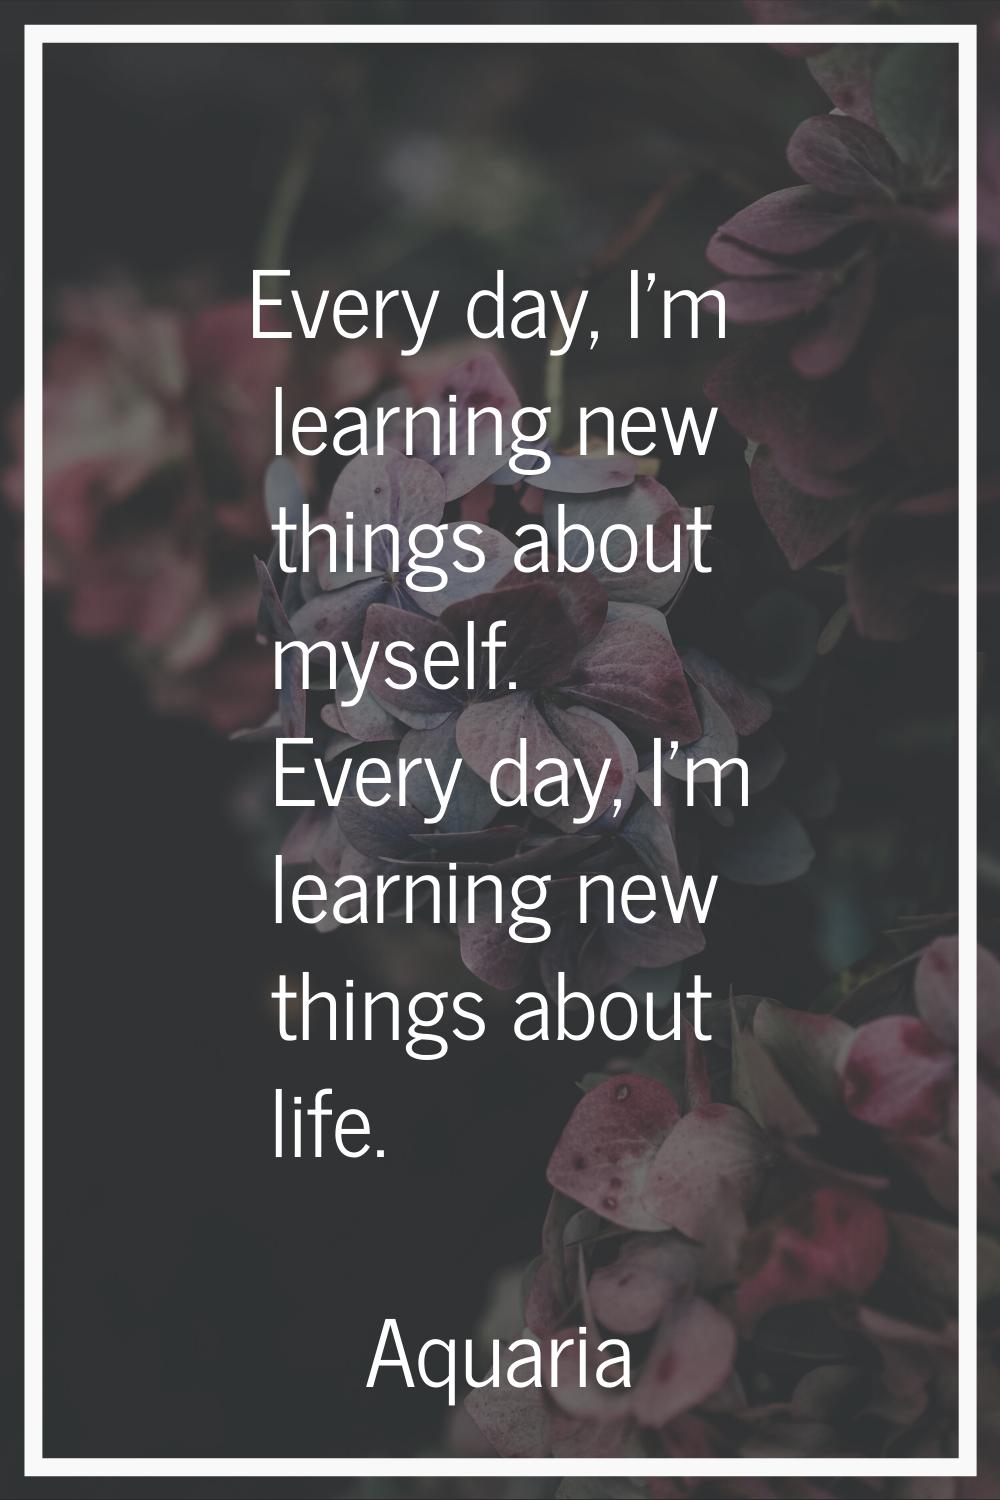 Every day, I'm learning new things about myself. Every day, I'm learning new things about life.